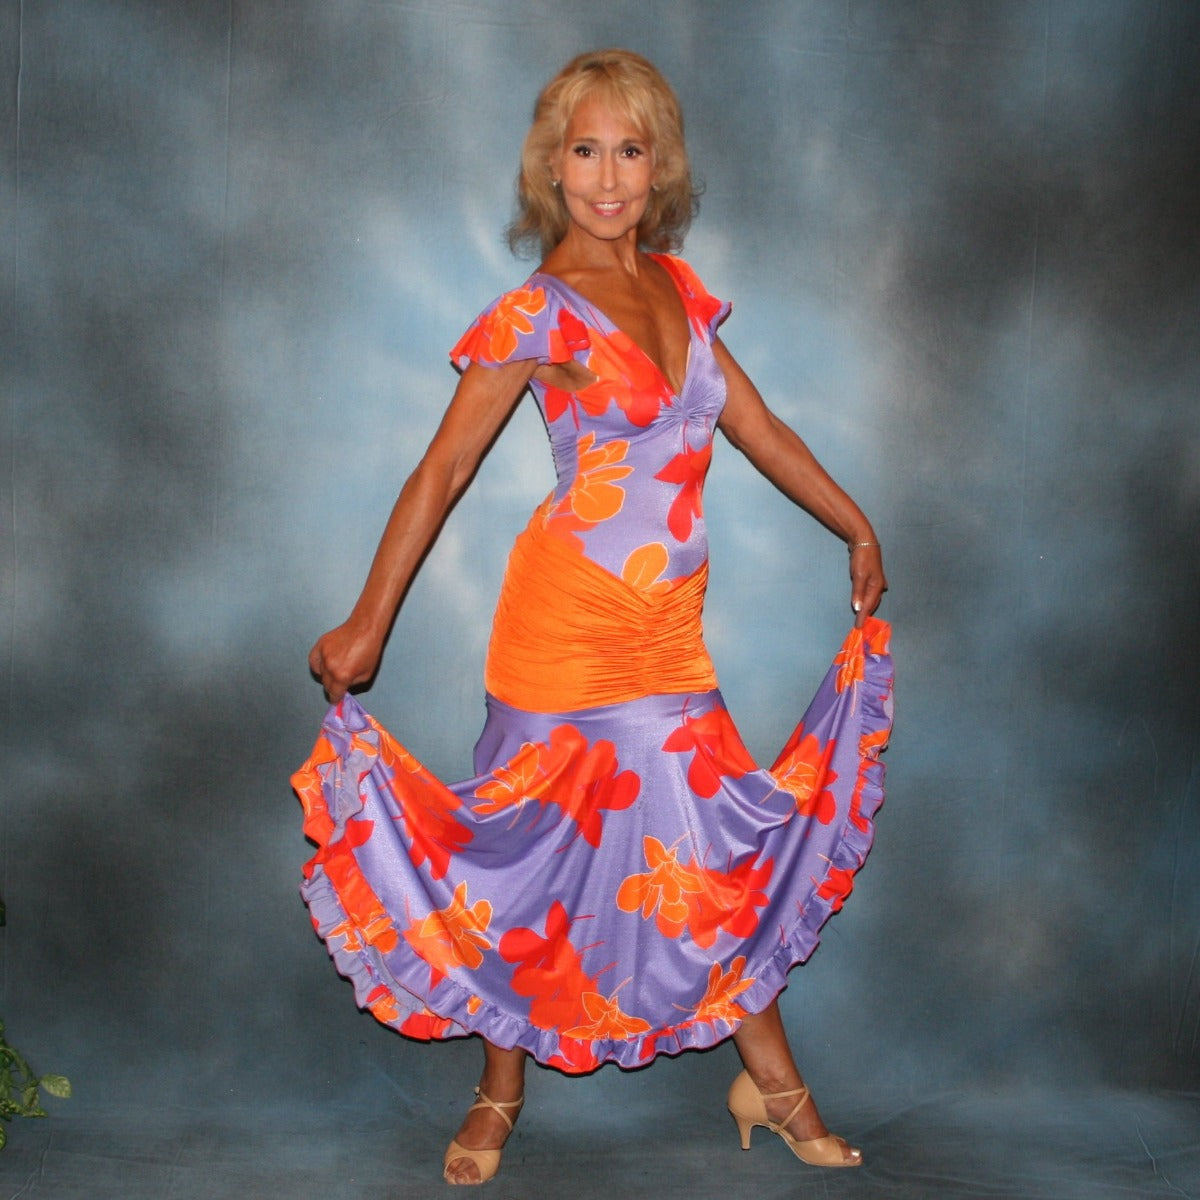 ropical print social ballroom dress created in lycra of deep orchid tropical print with purple flowers, features ruffly cap sleeves & ruffle on full circle skirt. The bodysuit is built right into the dress, so it makes a great & fun dress for teaching, especially if you work on theater arts! The look is finished with an orange ruched hip sash.